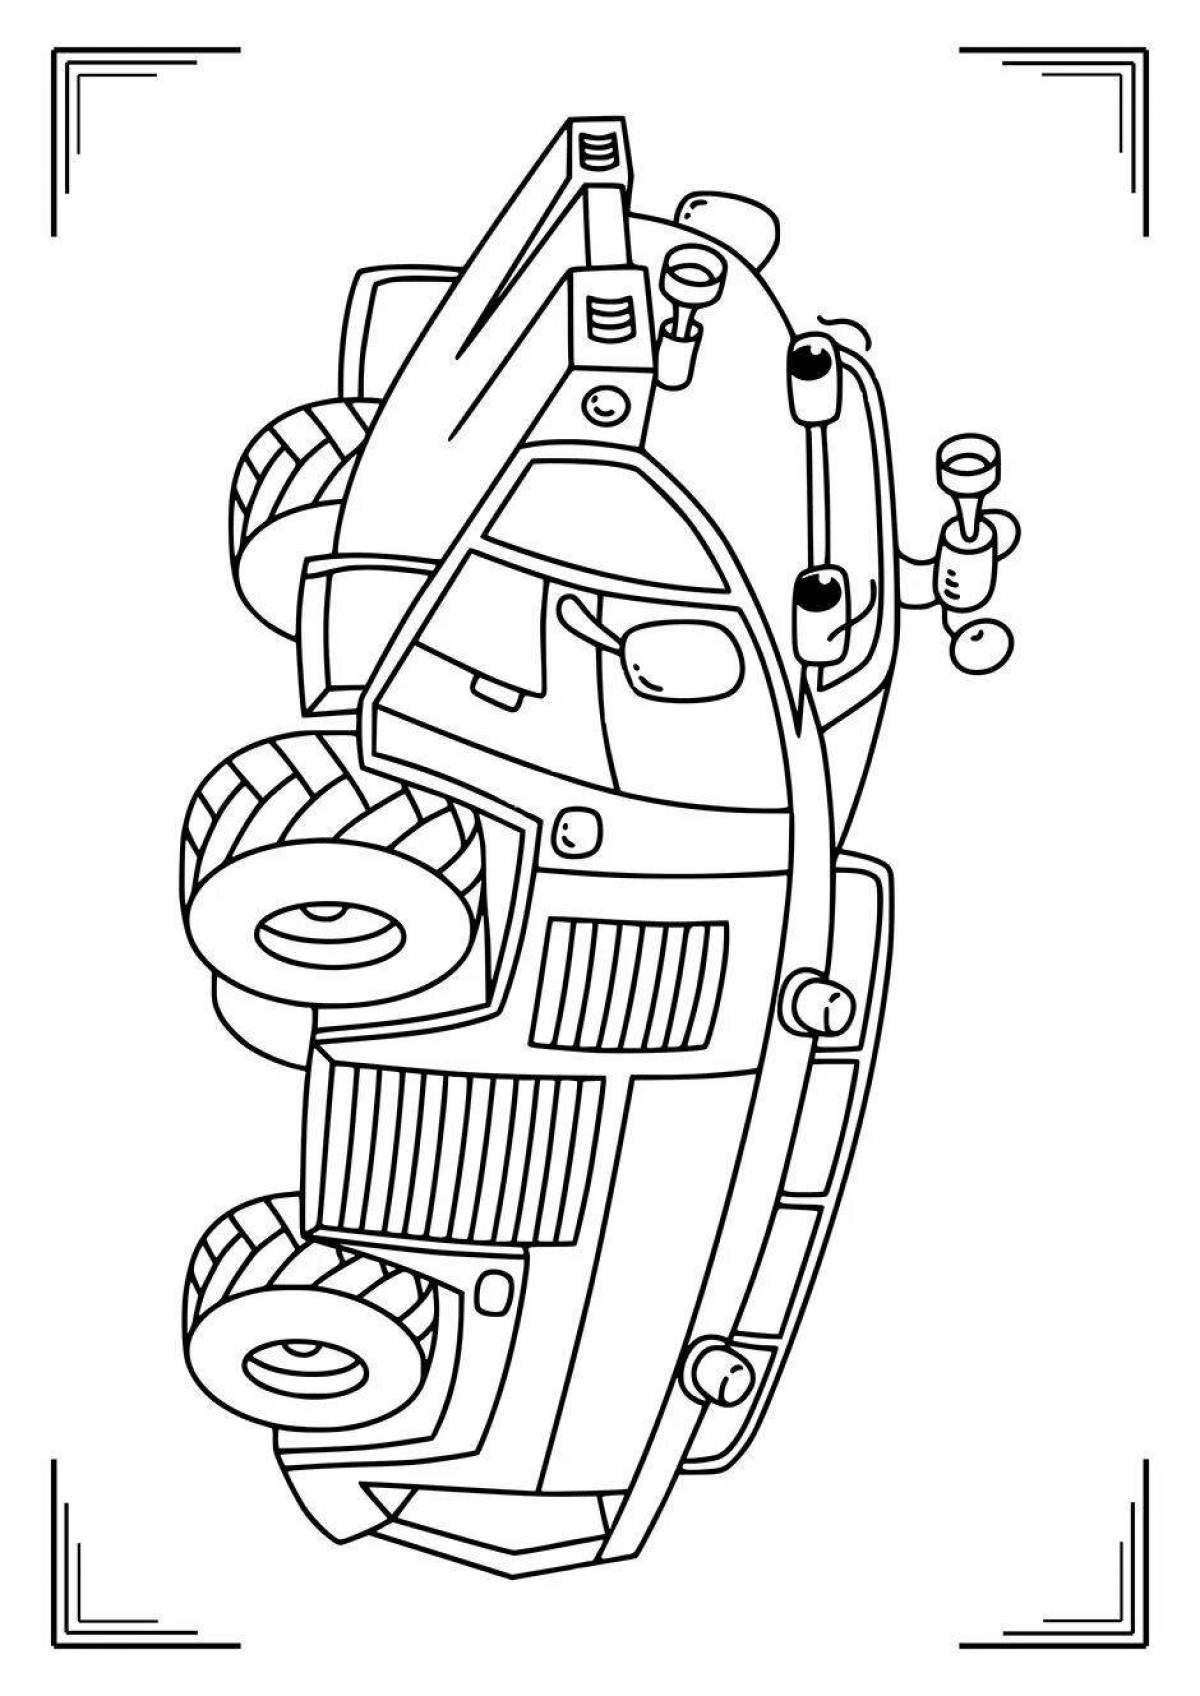 Finley bright fire truck coloring page